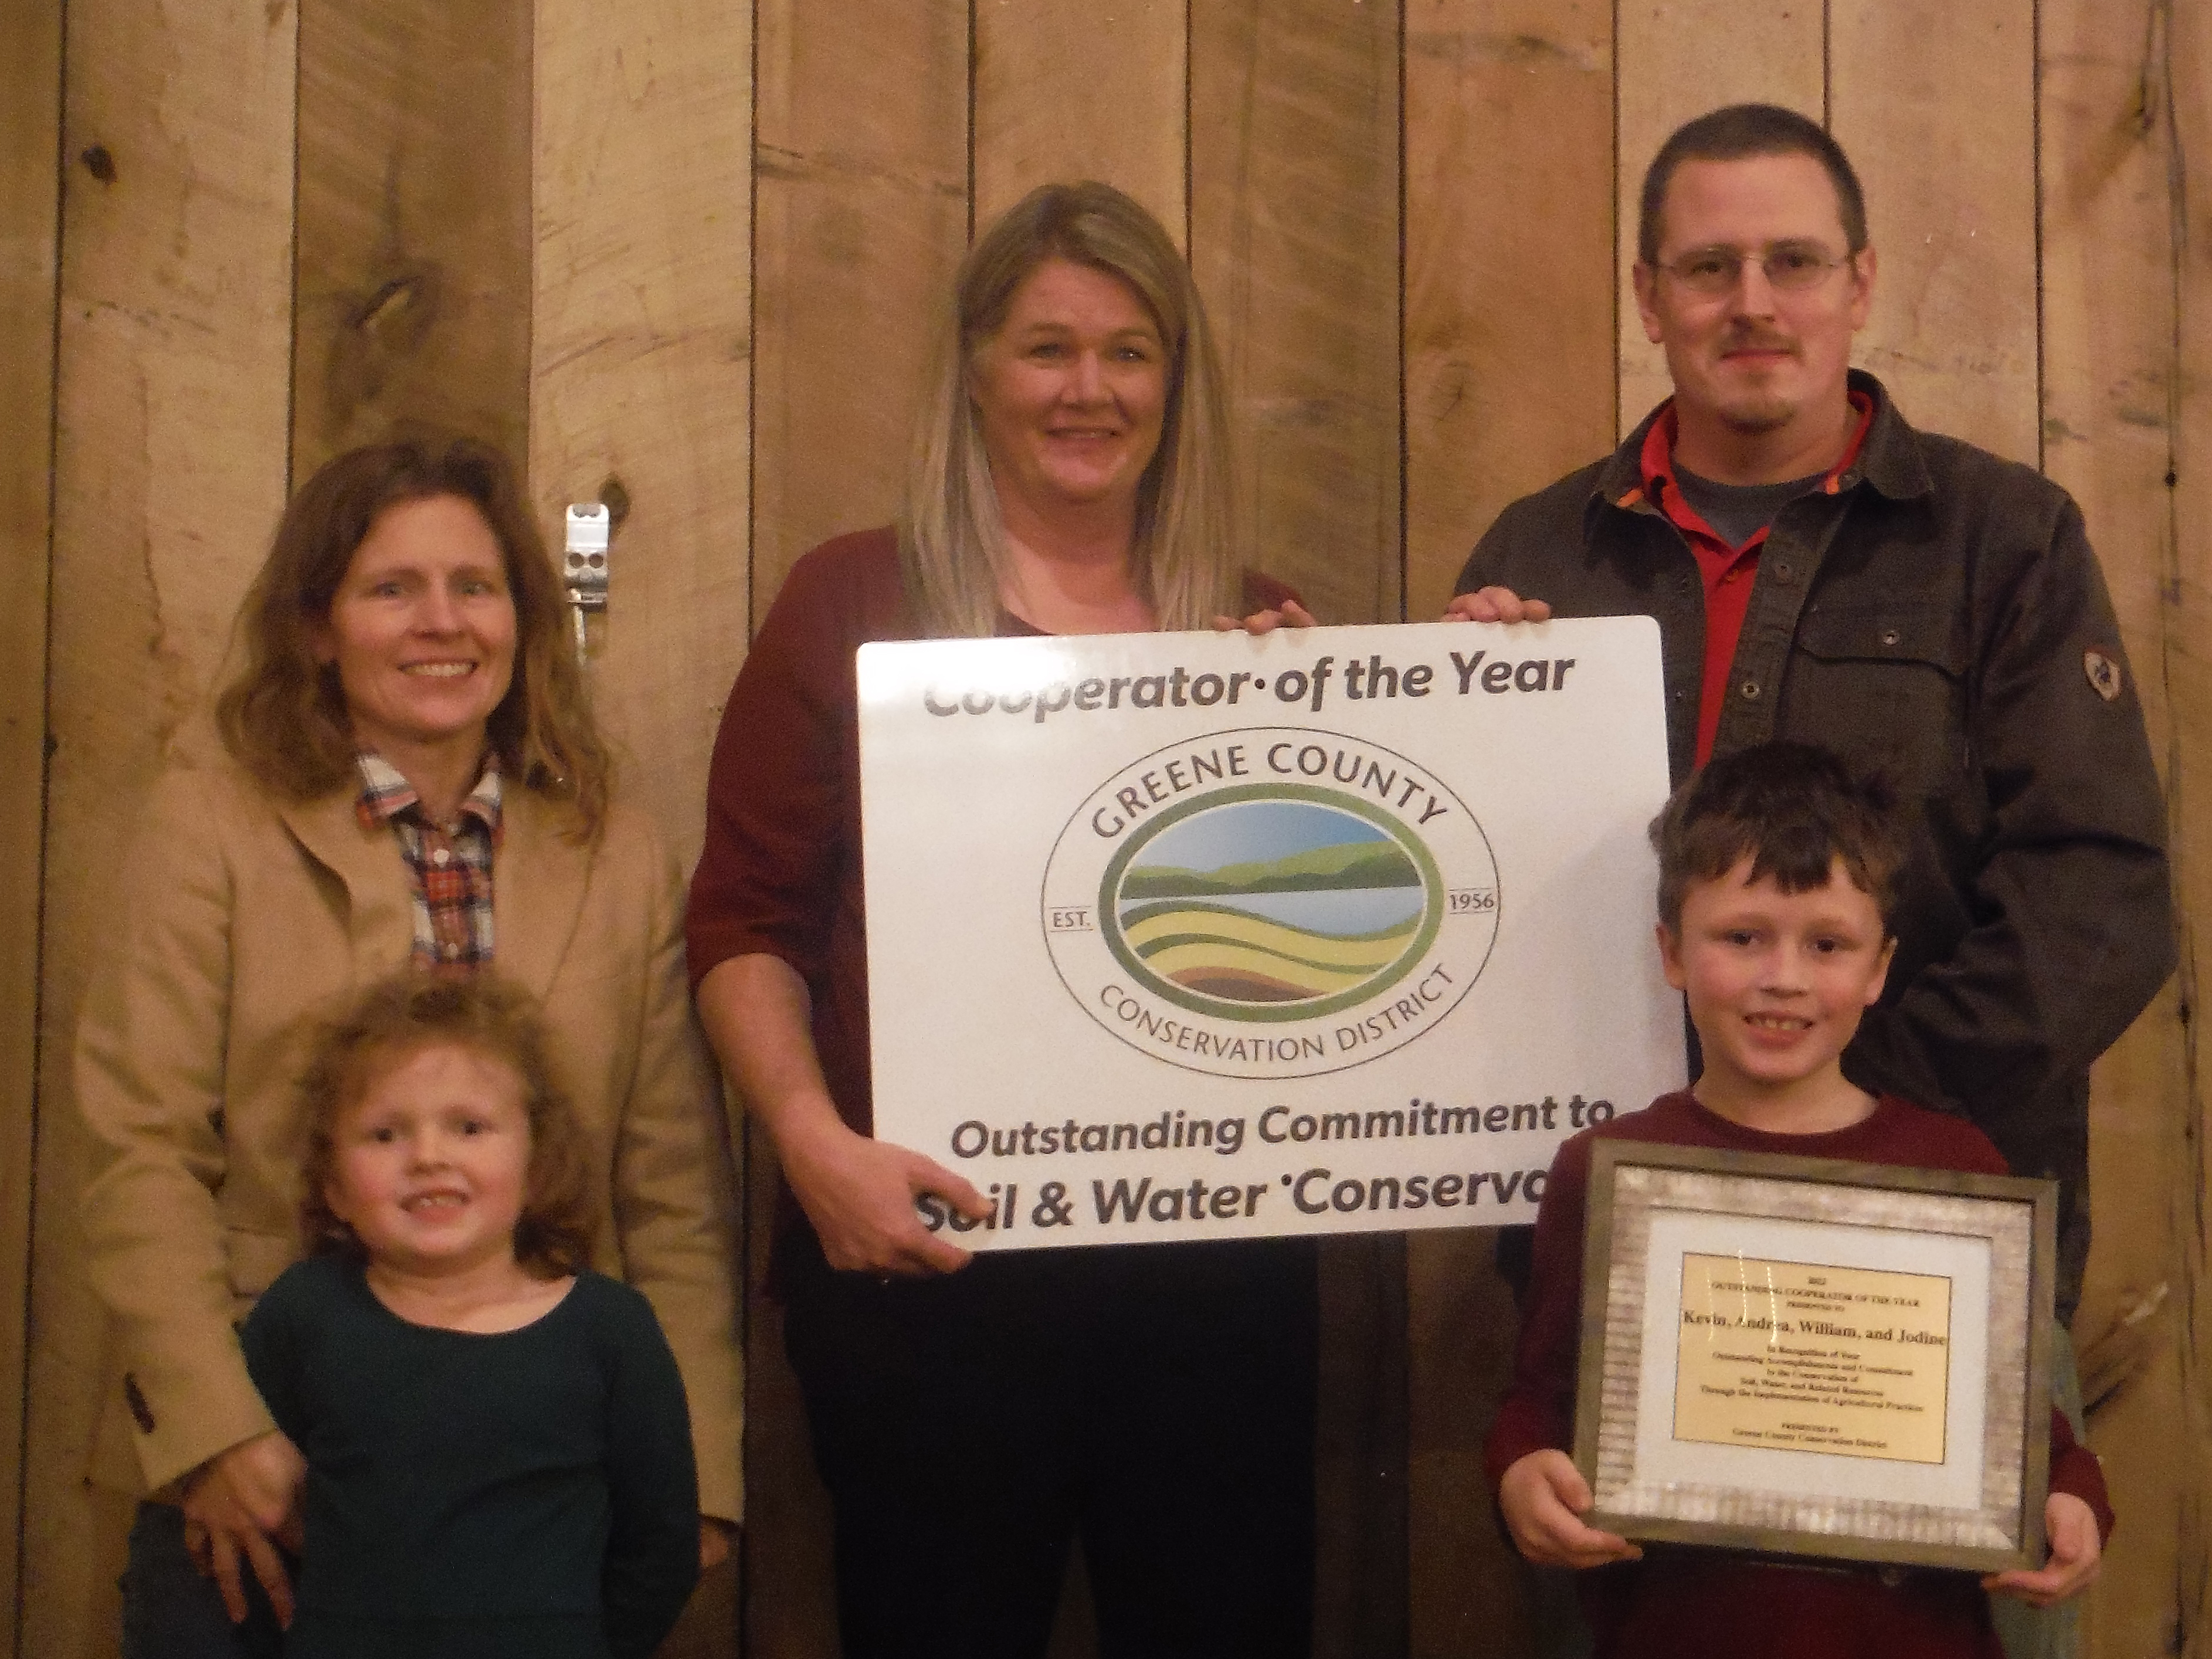 Lisa Snider. presented Kevin White along with his wife Andrea and children William and Jodine with the 2022 Outstanding Cooperator of the Year Award at the Greene County Conservation DistrictÃ¢â‚¬â„¢s annual award ceremony on Wednesday, Dec. 14